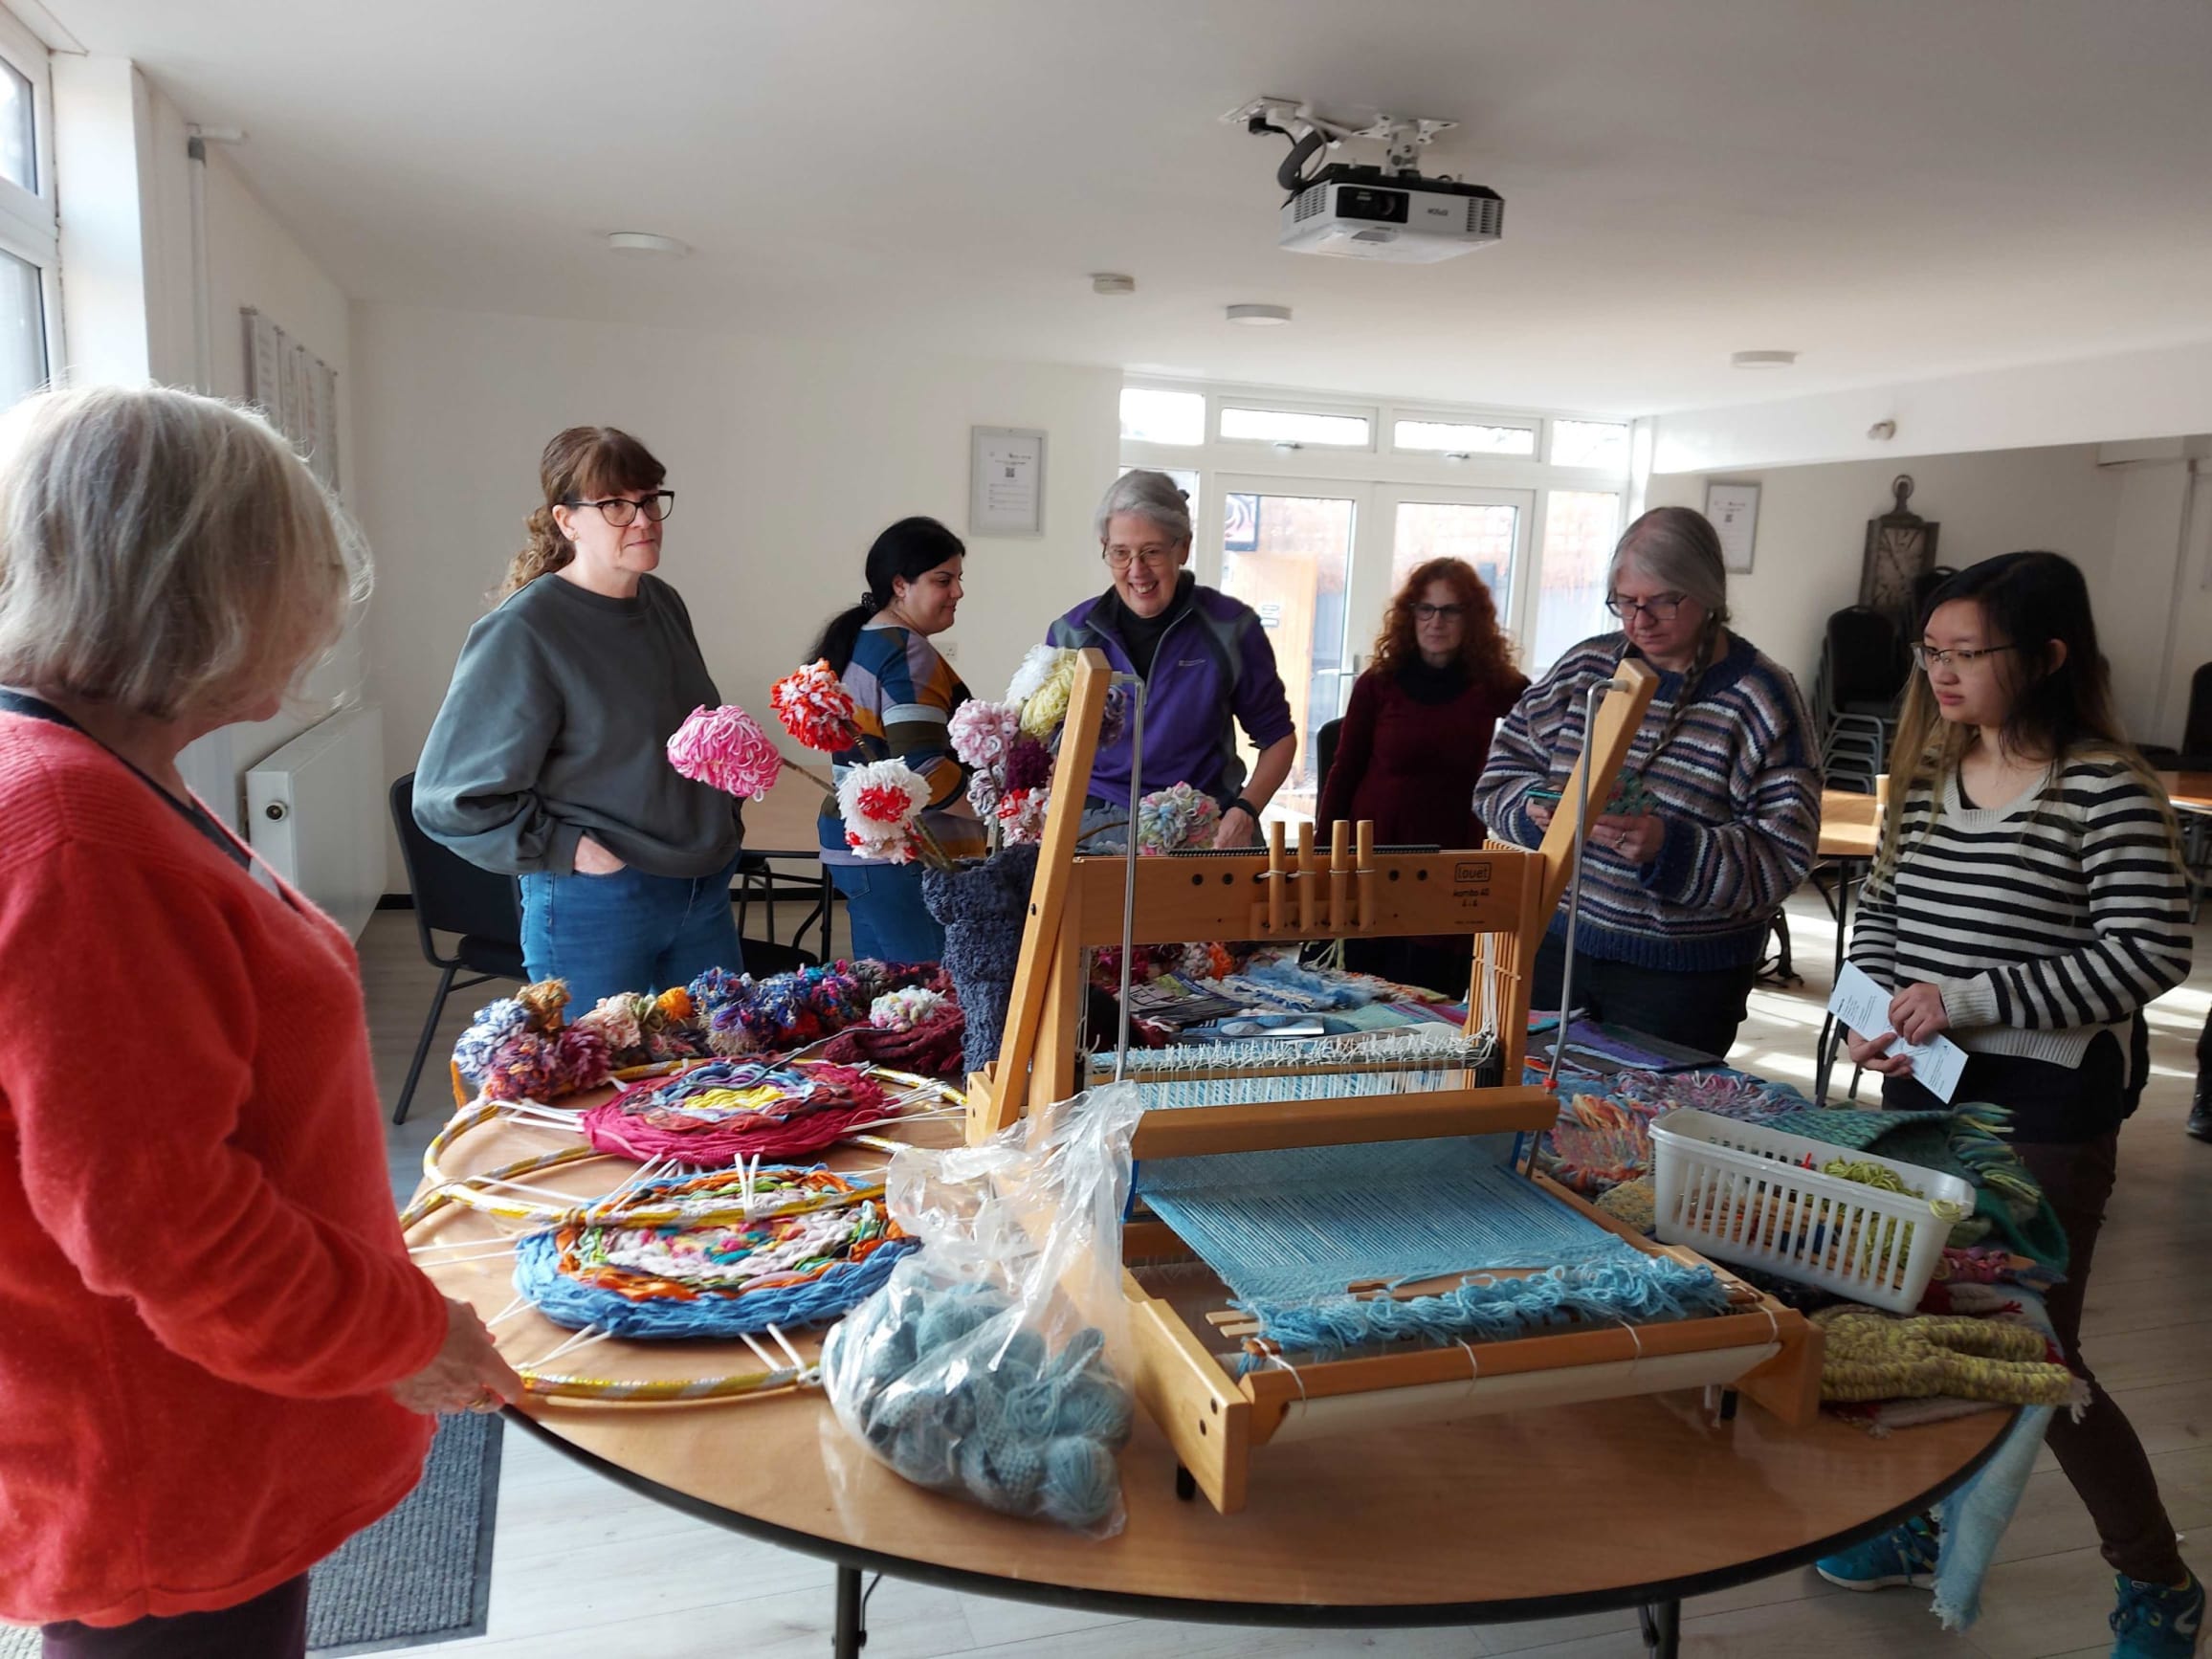 People around a table working with weaving materials at The Making of Coventry weaving workshop